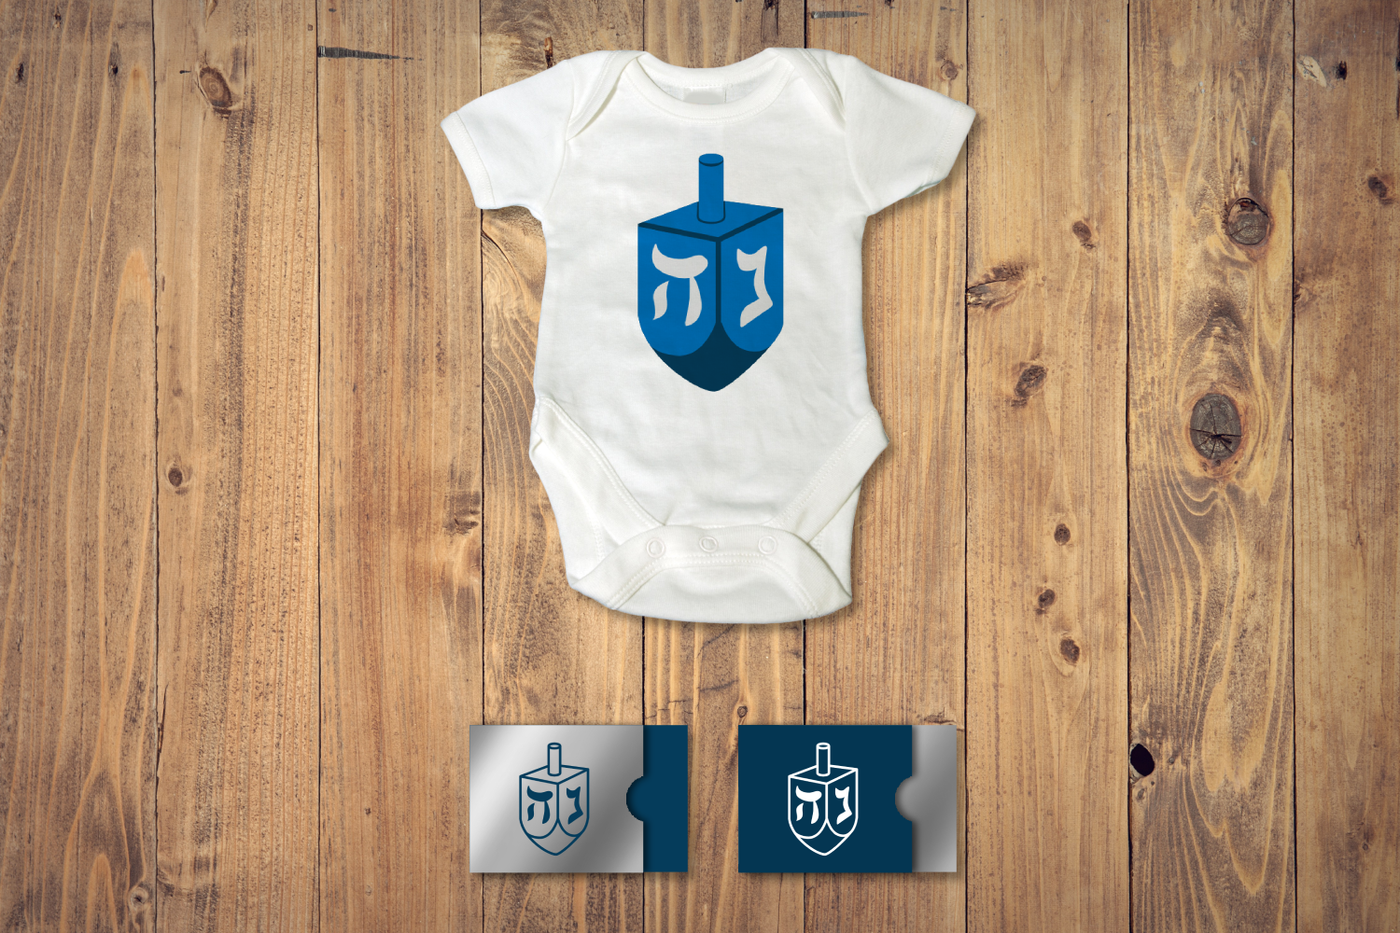 A baby onesie with two gift card holders below. Each has a dreidel design.